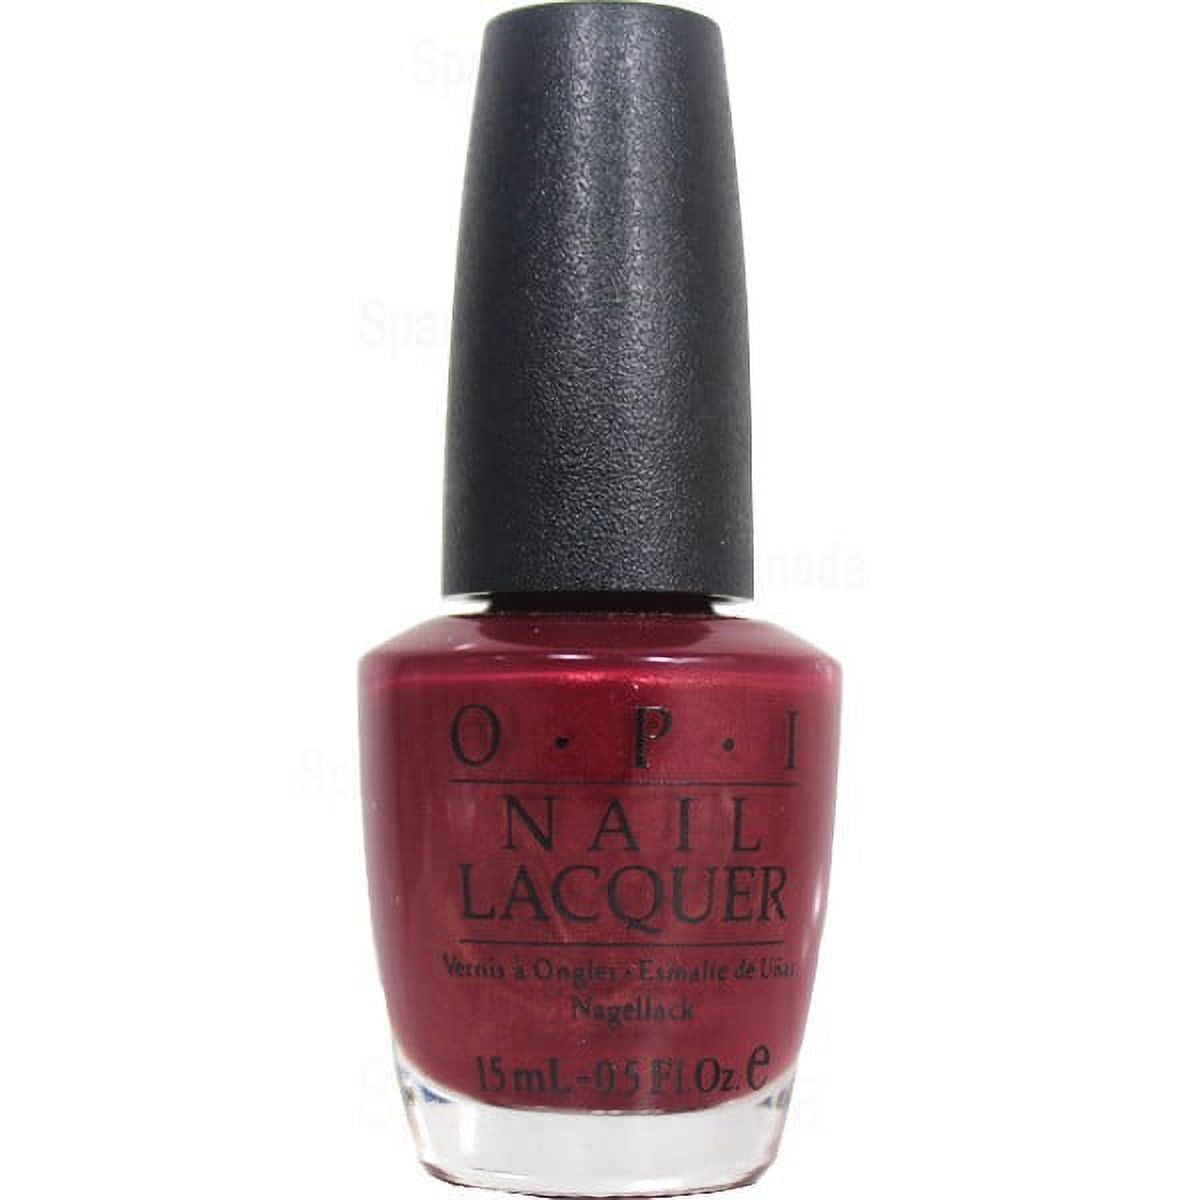 opi comparison Two-timing the zones – Look at my bow! – Shorts story – Kiss  me on my tulips